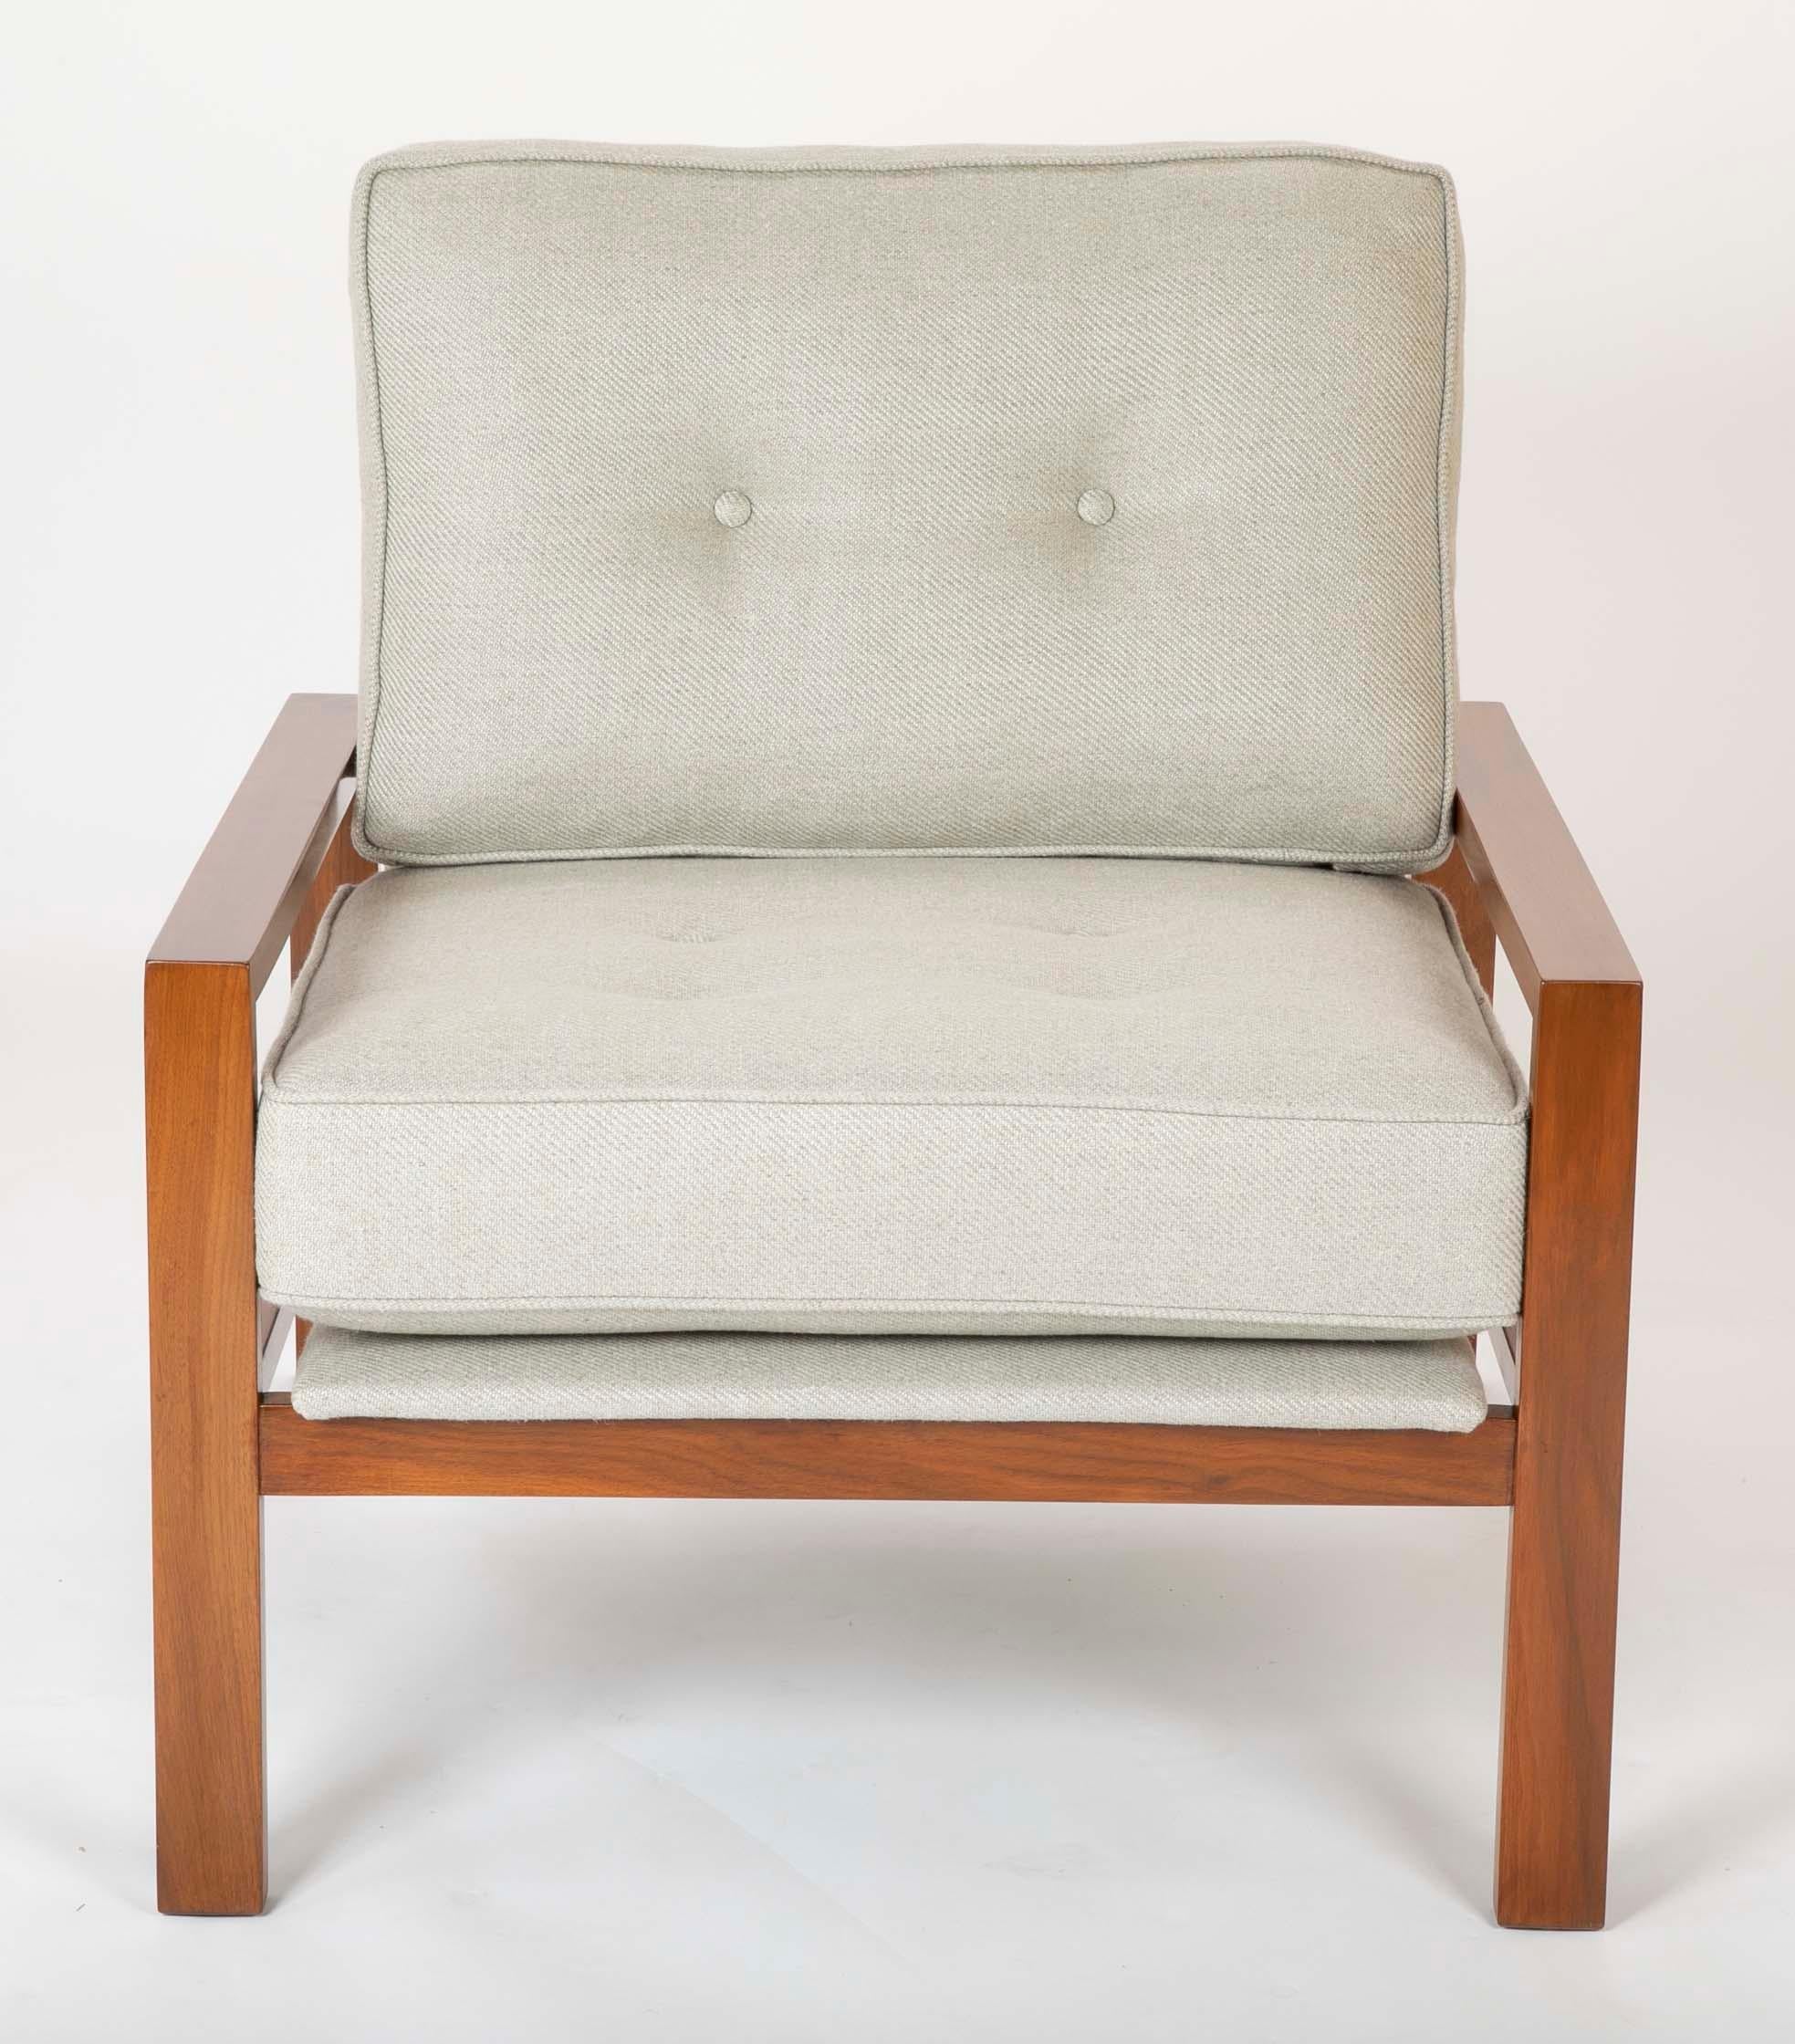 This Prototype chair was made in anticipation of a partnership with Brown Saltman that was never realized. Designed and produced in 1955 the chair was featured in the 1955 California design Exhibition at The Municipal art center of long beach and